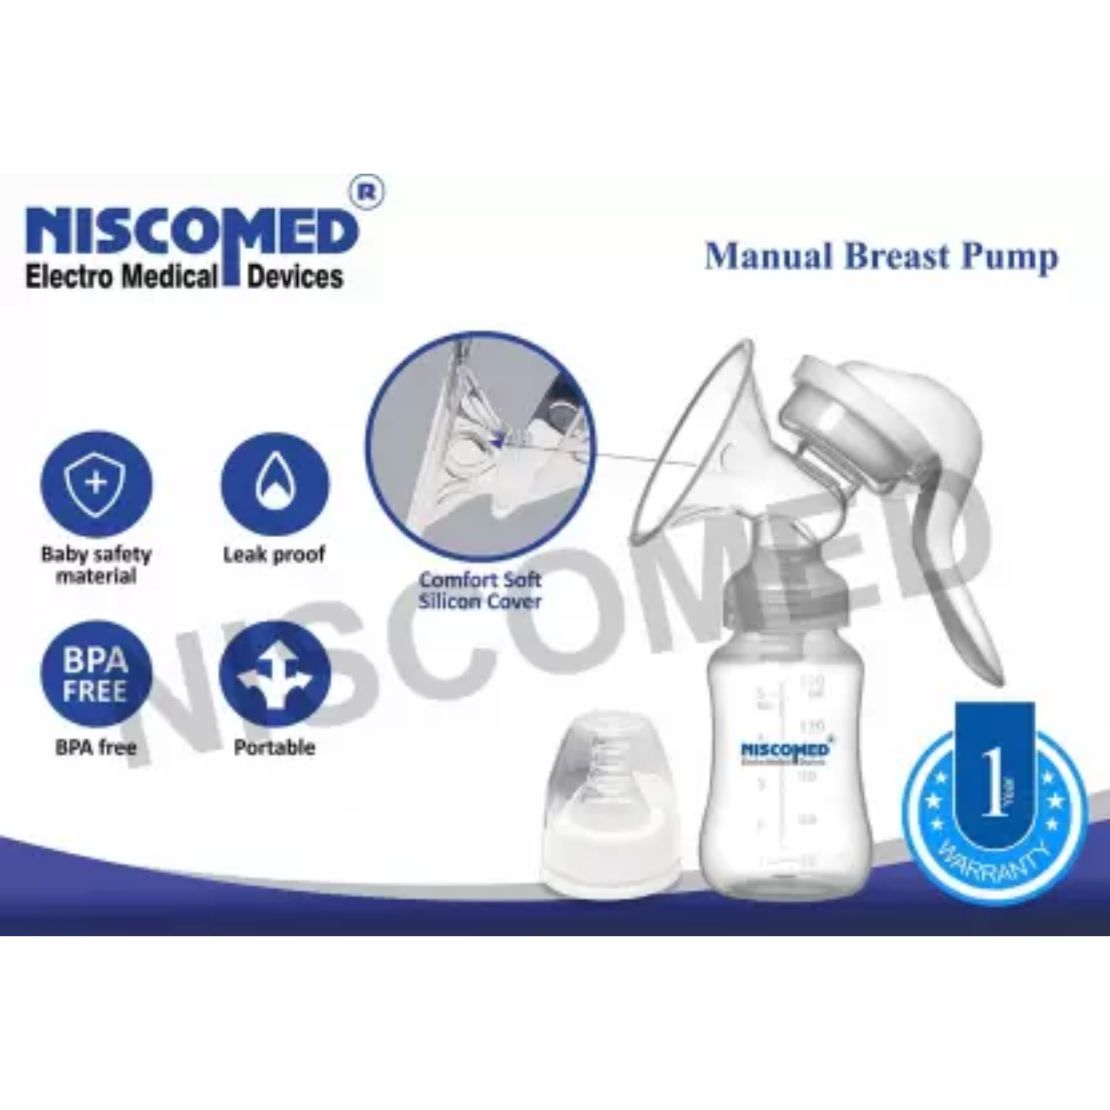 NISCOMED White Manual, Buy Baby Care Products in India